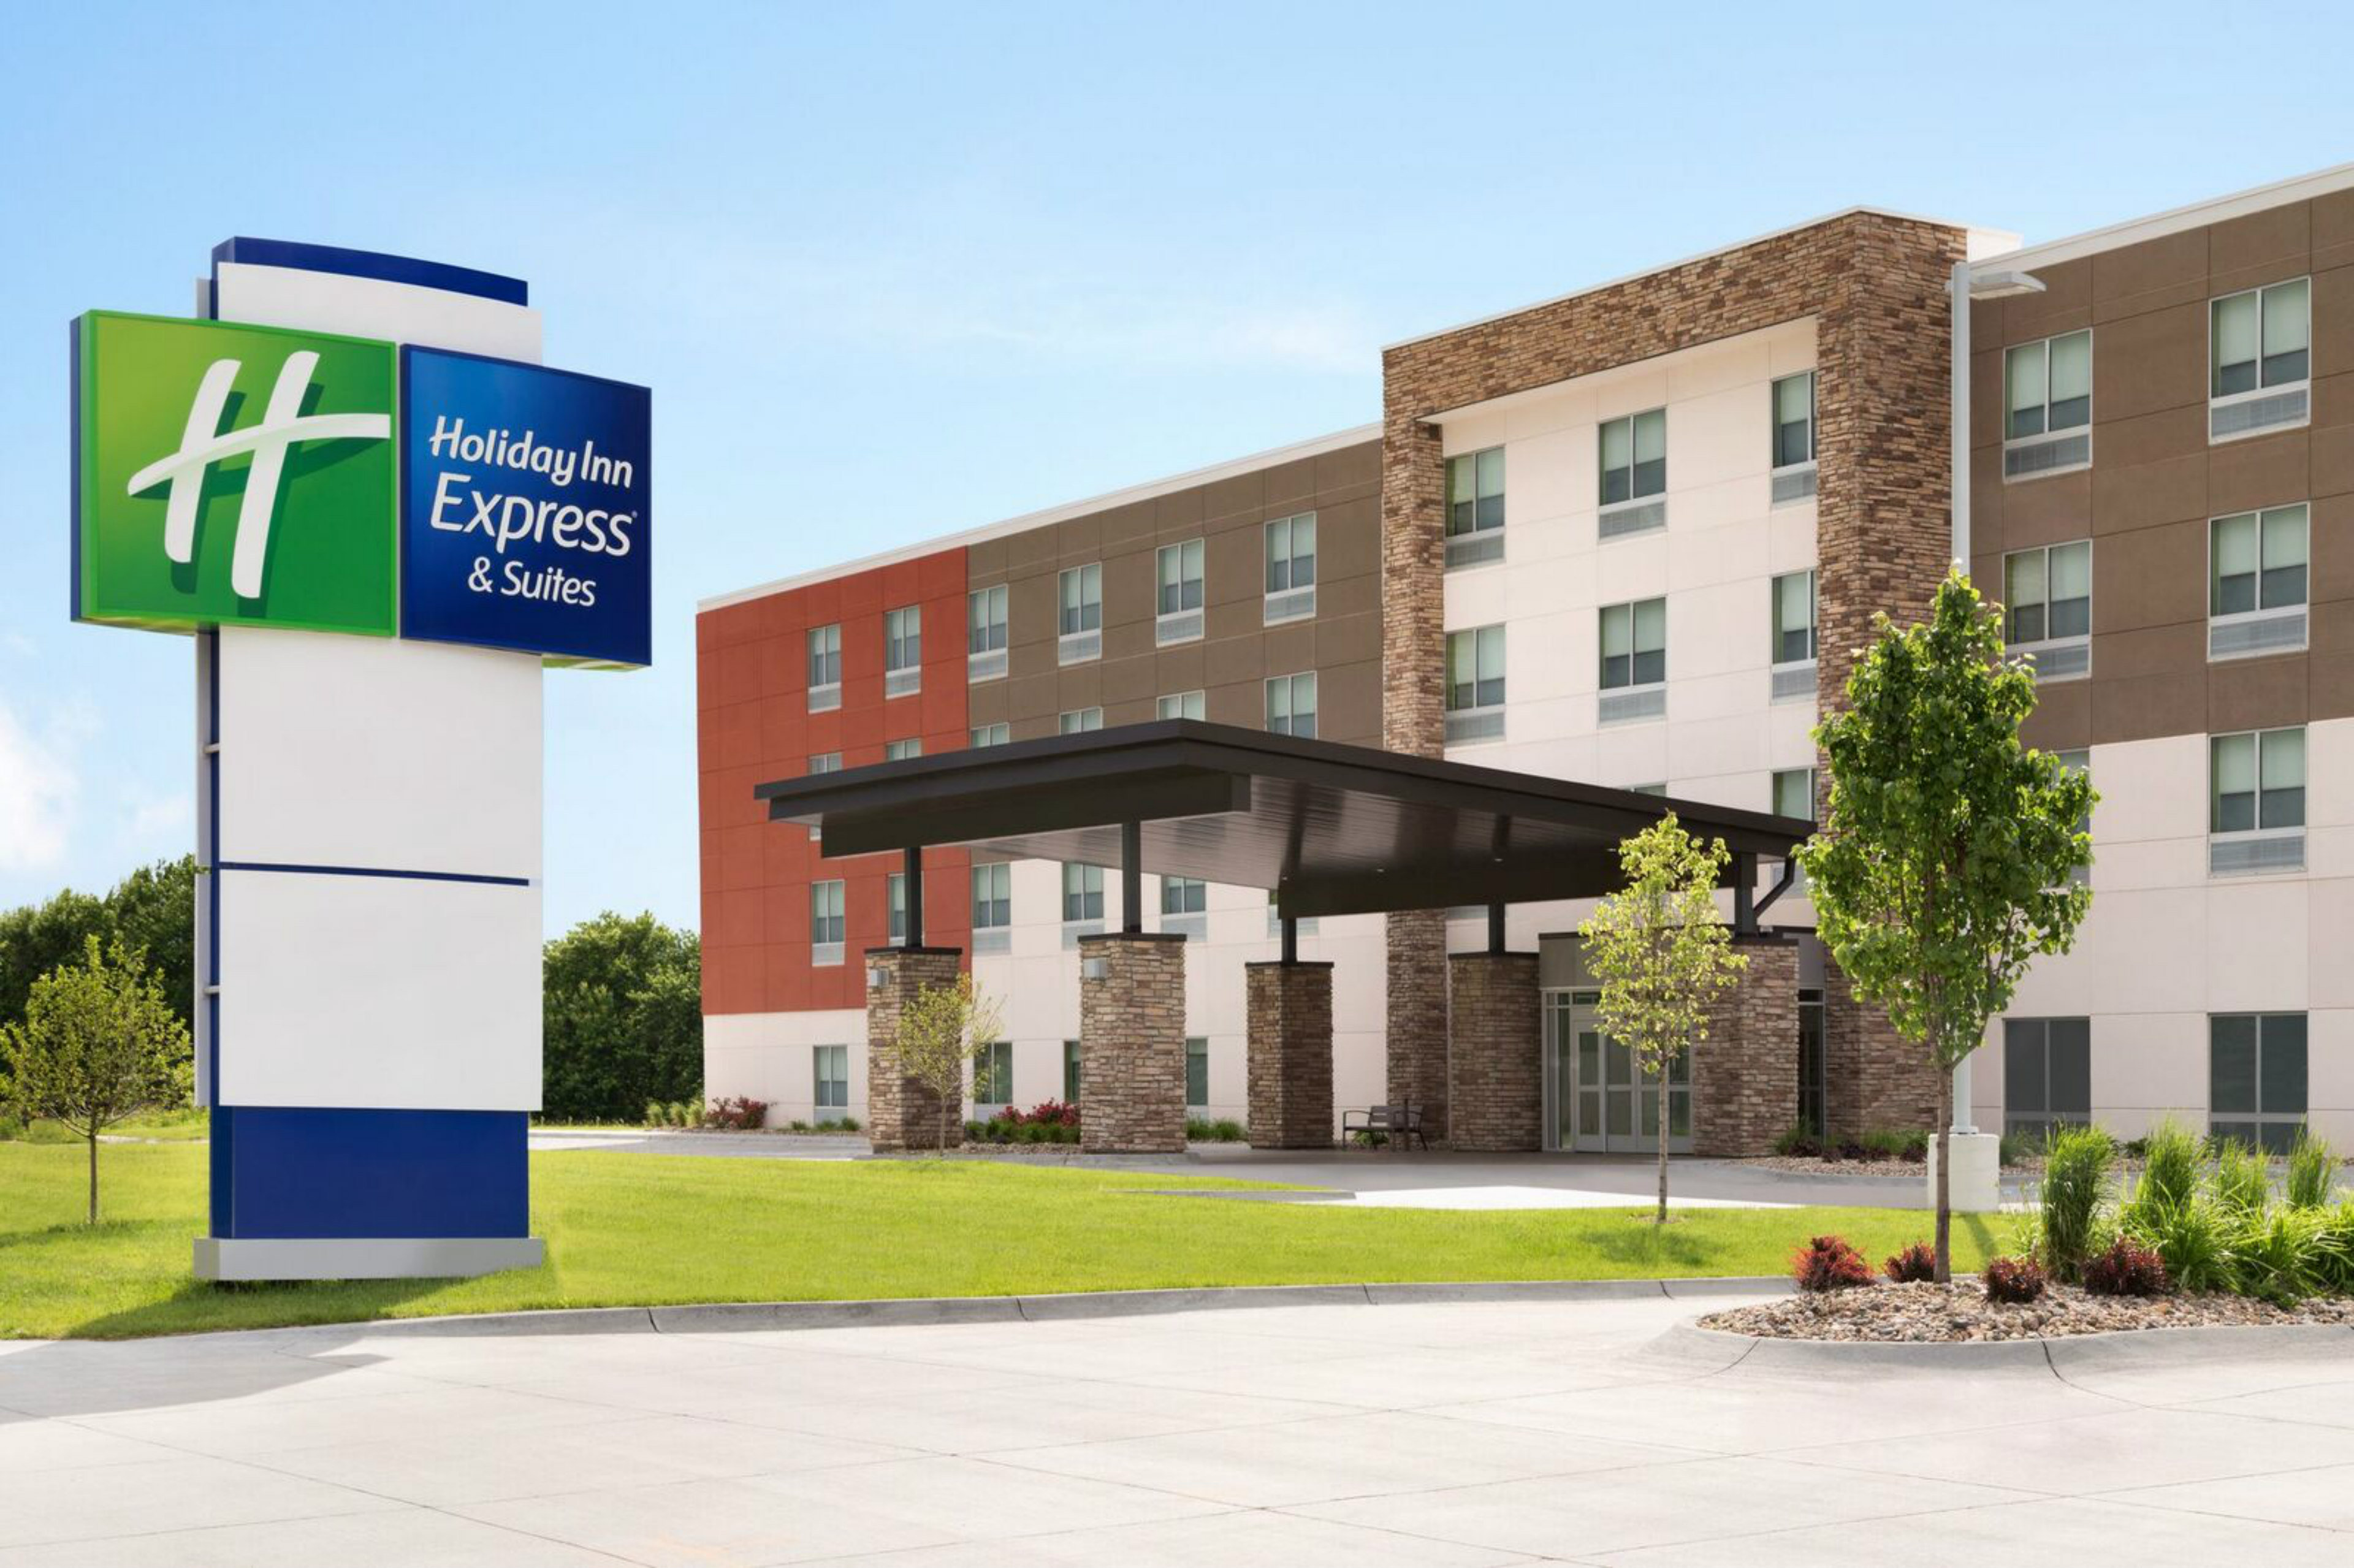 Welcome to the Holiday Inn Express & Suites - Millersburg, Ohio